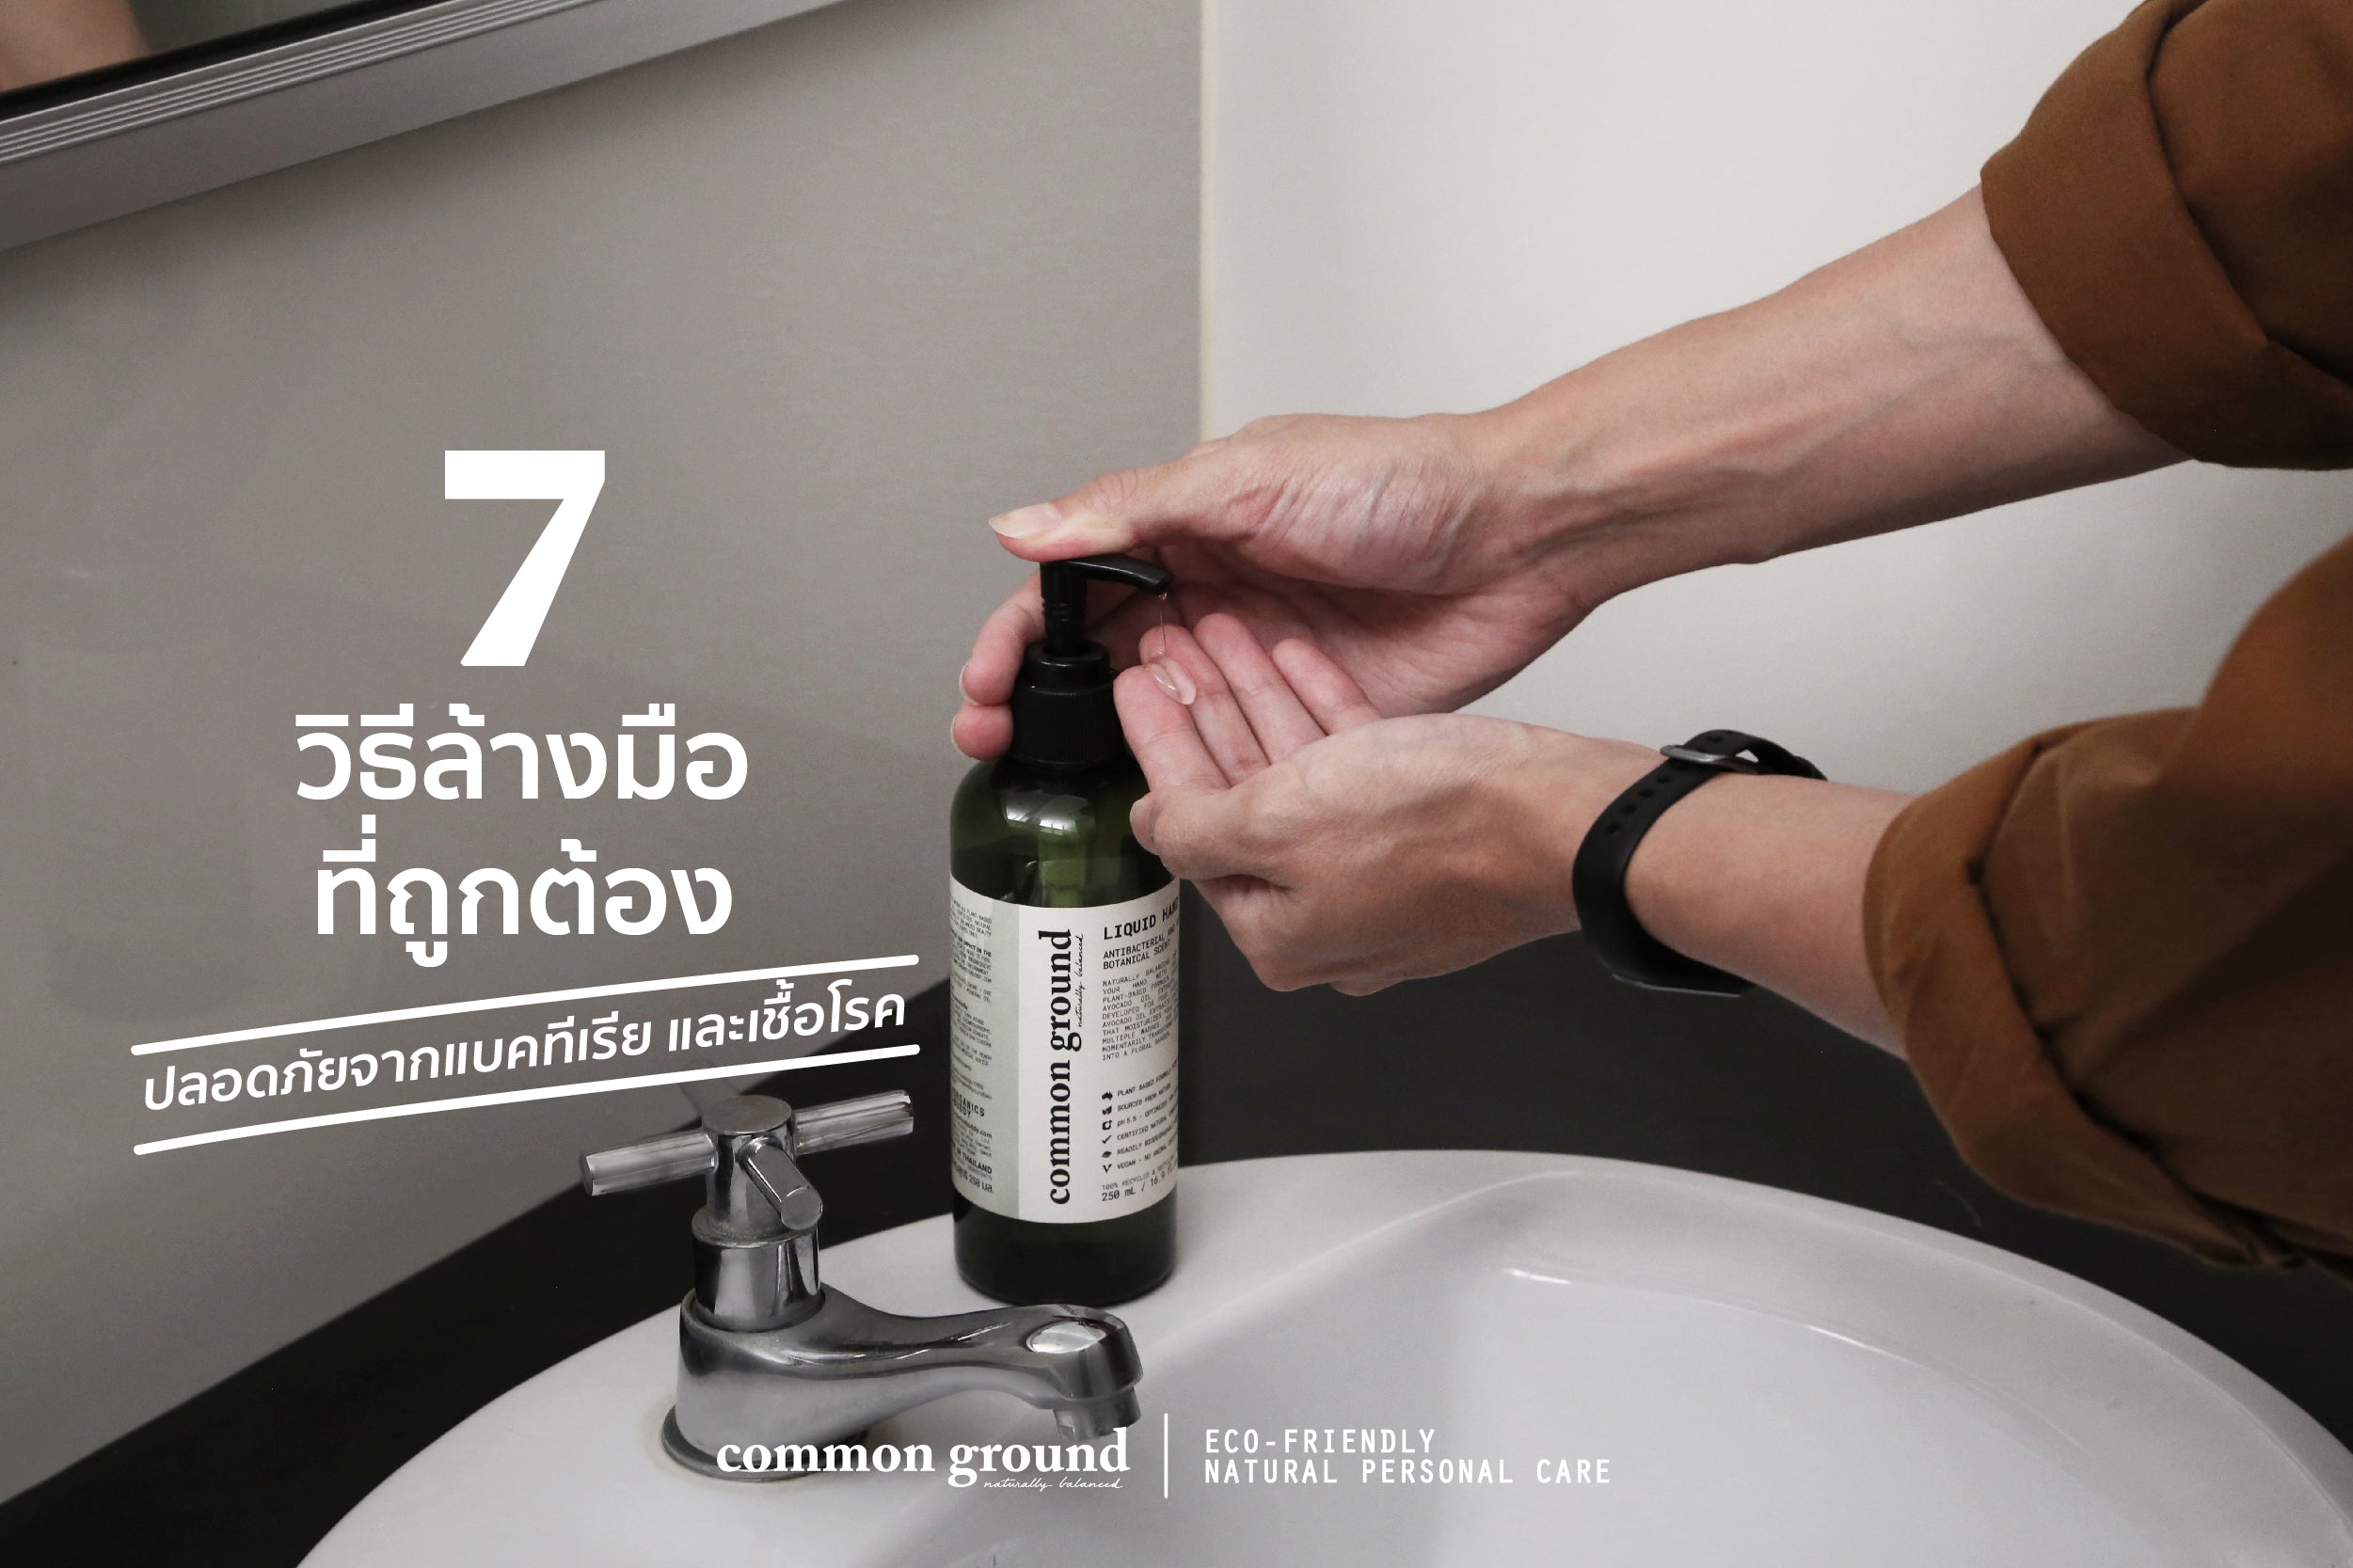 7 Steps to Clean Hands